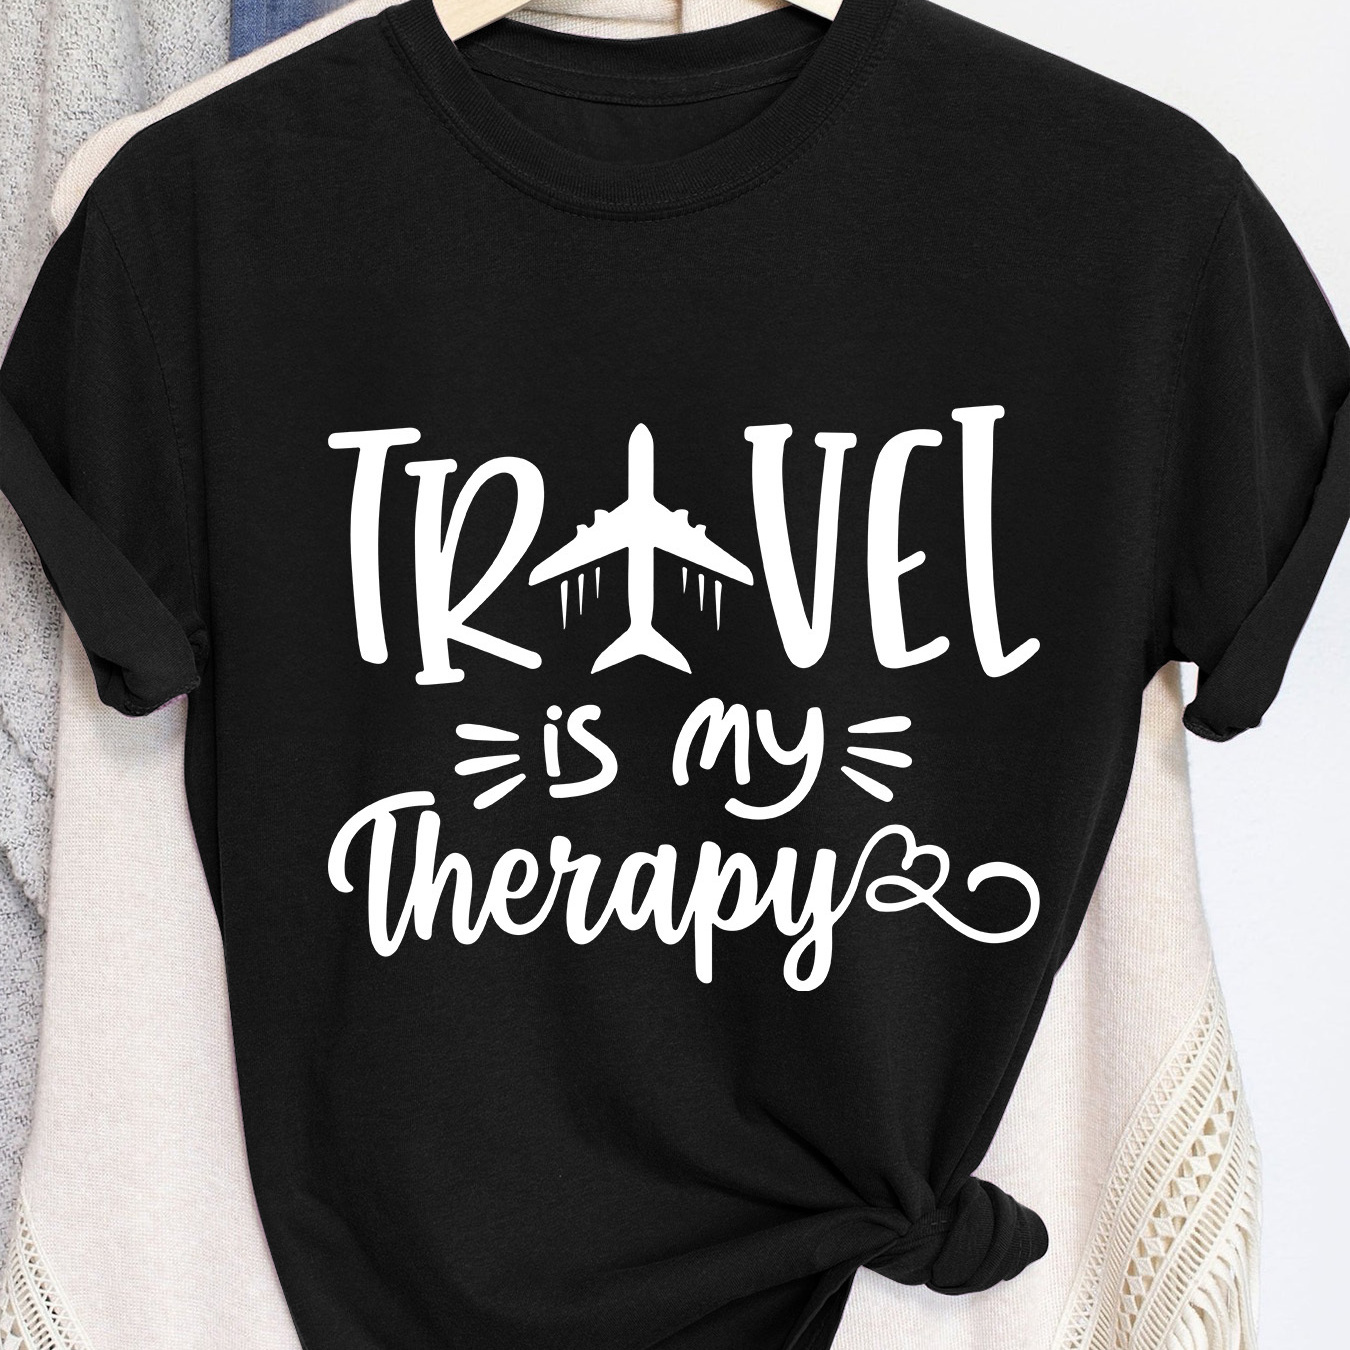 

Letter & Airplane Print T-shirt, Short Sleeve Crew Neck Casual Top For Summer & Spring, Women's Clothing